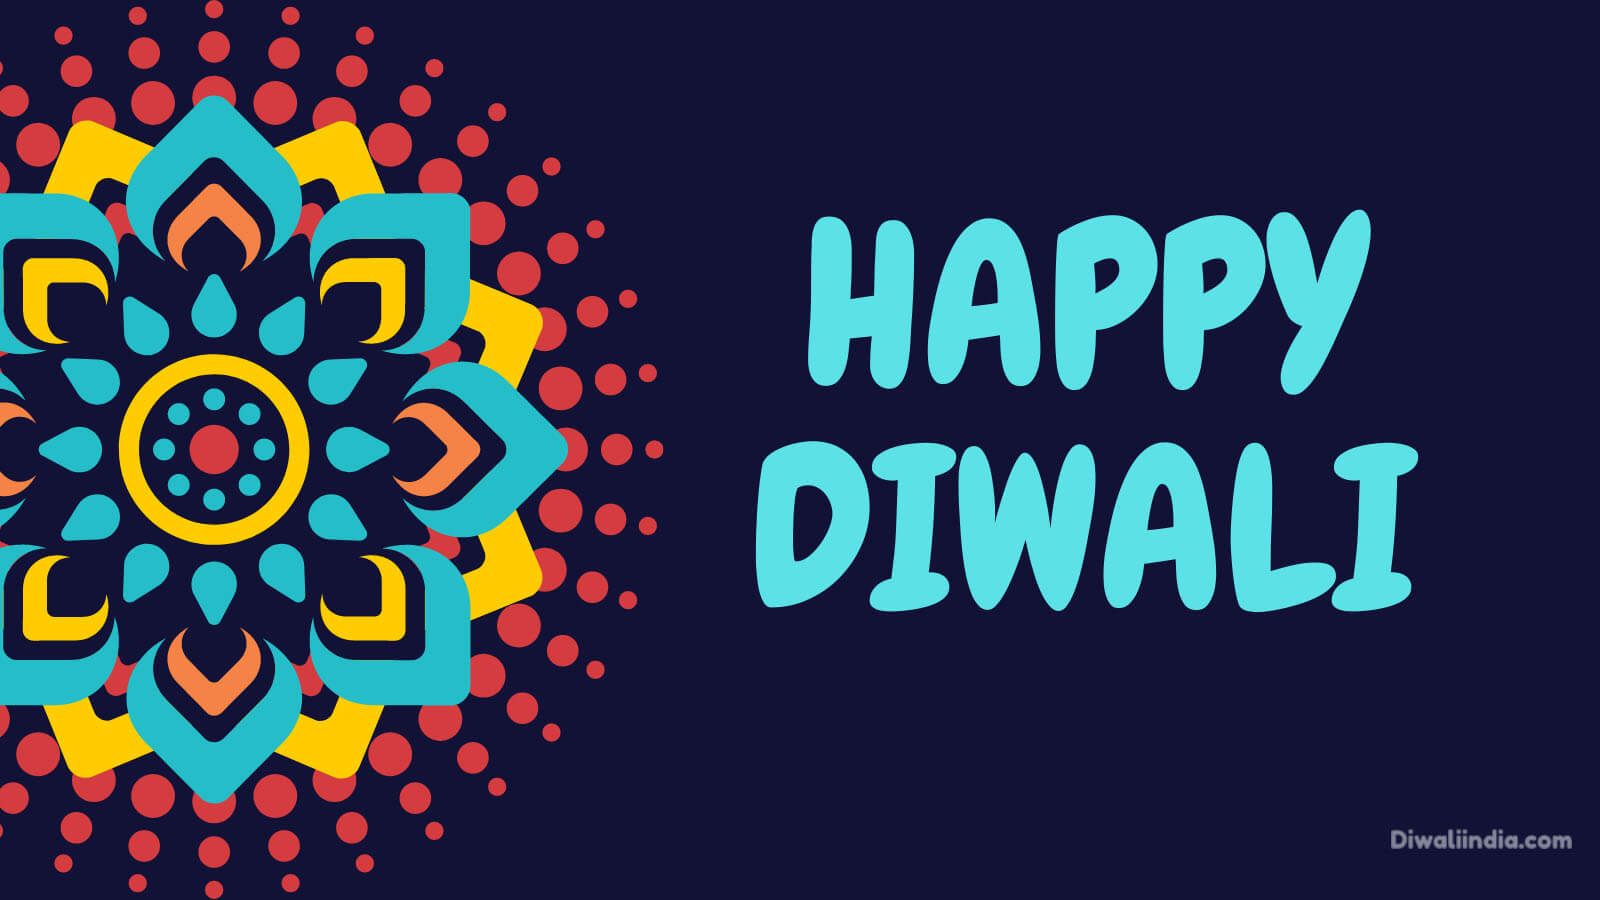 Happy Diwali 2022 Wishes Messages with Image for Friends & Family